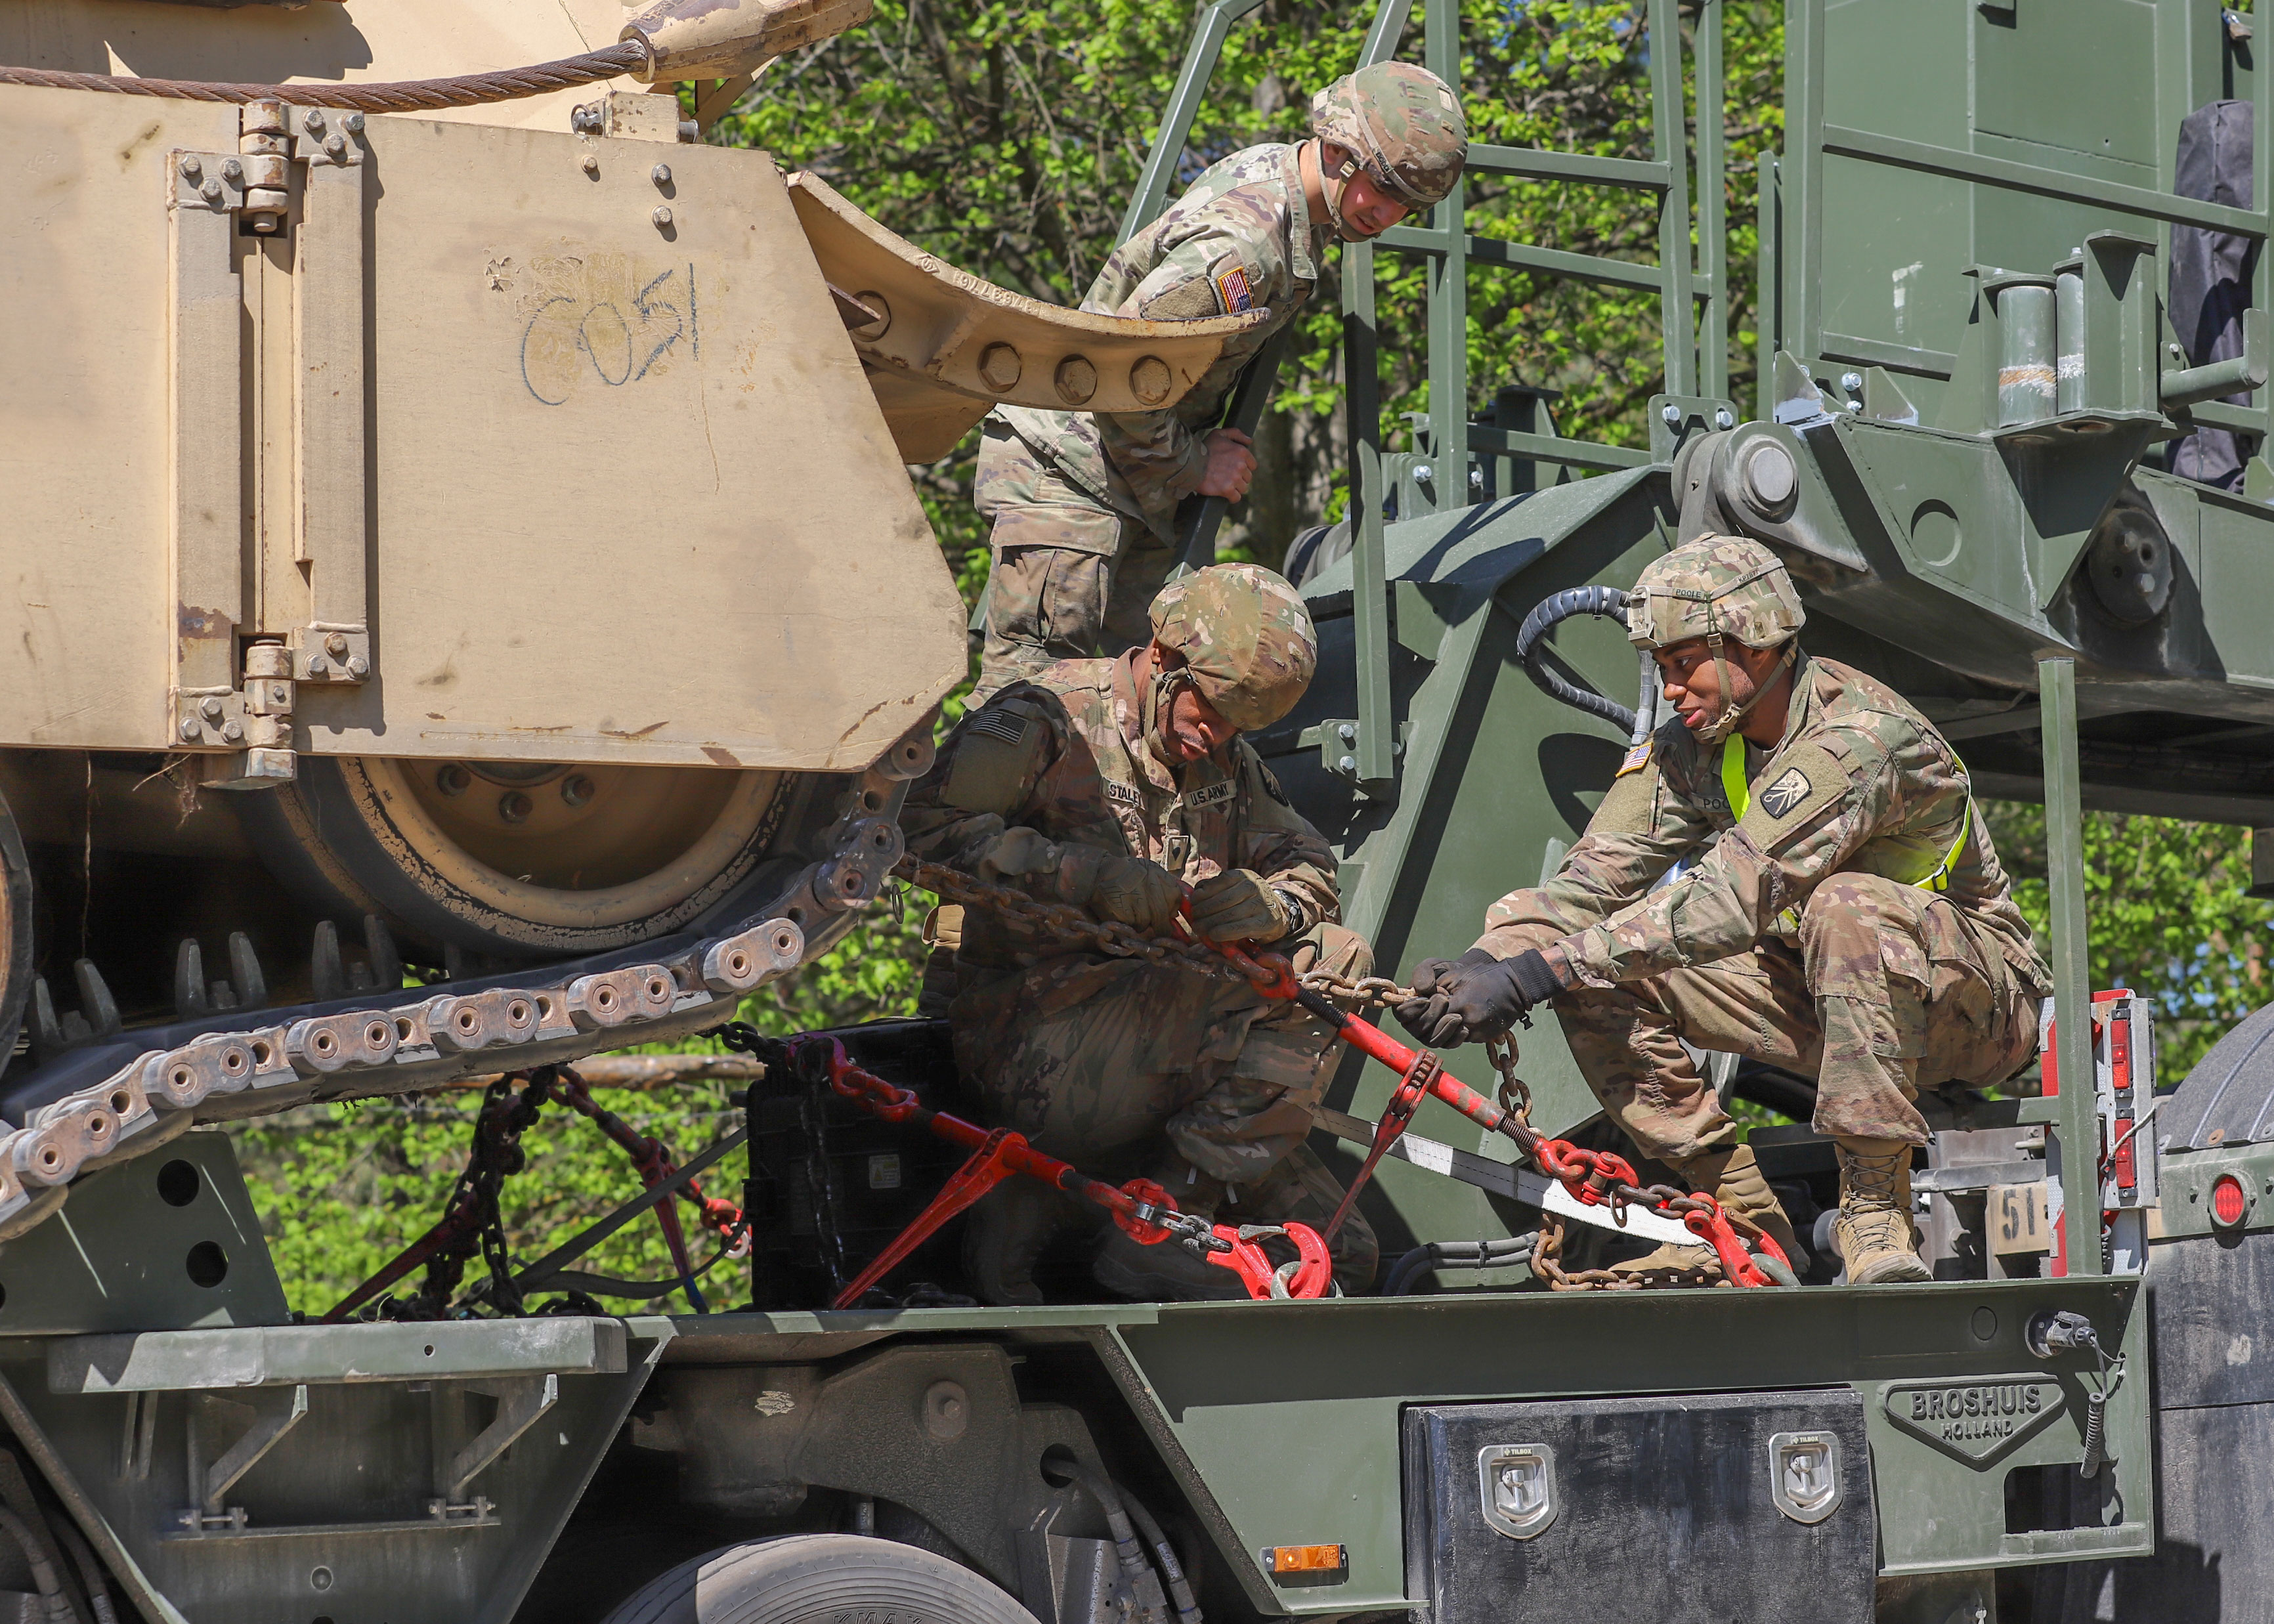 U.S. Soldiers assigned to the 51st Composite Truck Company, 8th Combat Sustainment Support Battalion, 16th Sustainment Brigade, begin preparing large armored vehicles for transportation towards the Narew river during Defender Europe at Lomza, Poland, May 17, 2022. Defender Europe 22 is a series of U.S. Army Europe and Africa multinational training exercises in Eastern Europe. The exercise demonstrates U.S. Army Europe and Africa’s ability to conduct large-scale ground combat operations across multiple theaters supporting NATO. (U.S. Army photo by Spc. Devin Klecan).